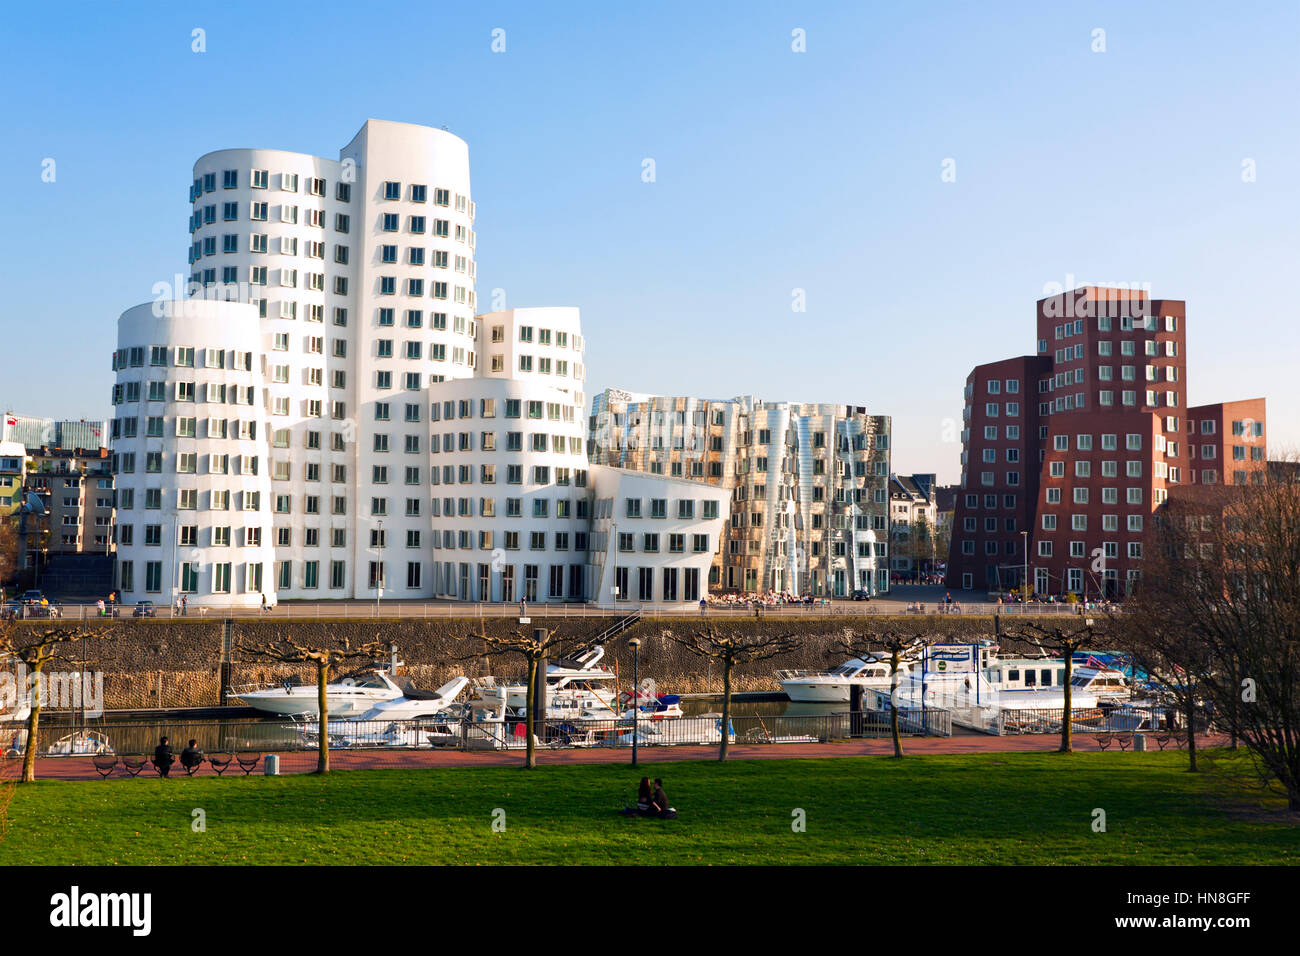 Dusseldorf, Germany - April 3, 2009: Frank Owen Gehry's Neuer Zollhof buildings at the MedienHafen with marina in foreground. Stock Photo